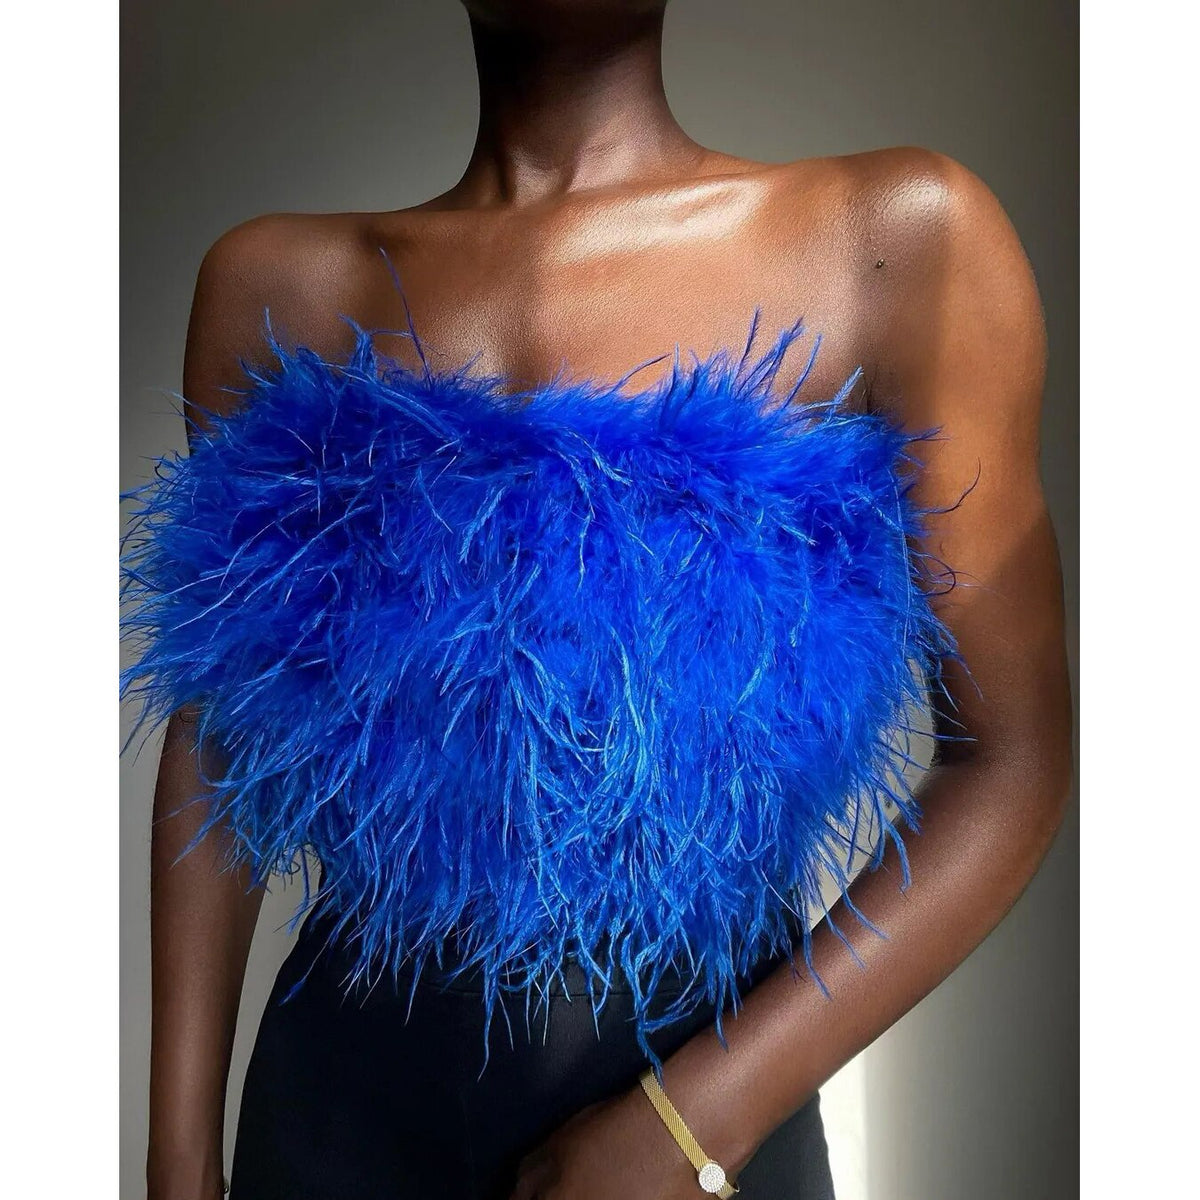 Sonicelife  Feather Strapless Tank Tops Women Summer Party Club Sleevelss Fluffy Fashion Bustier Tops Female 2023